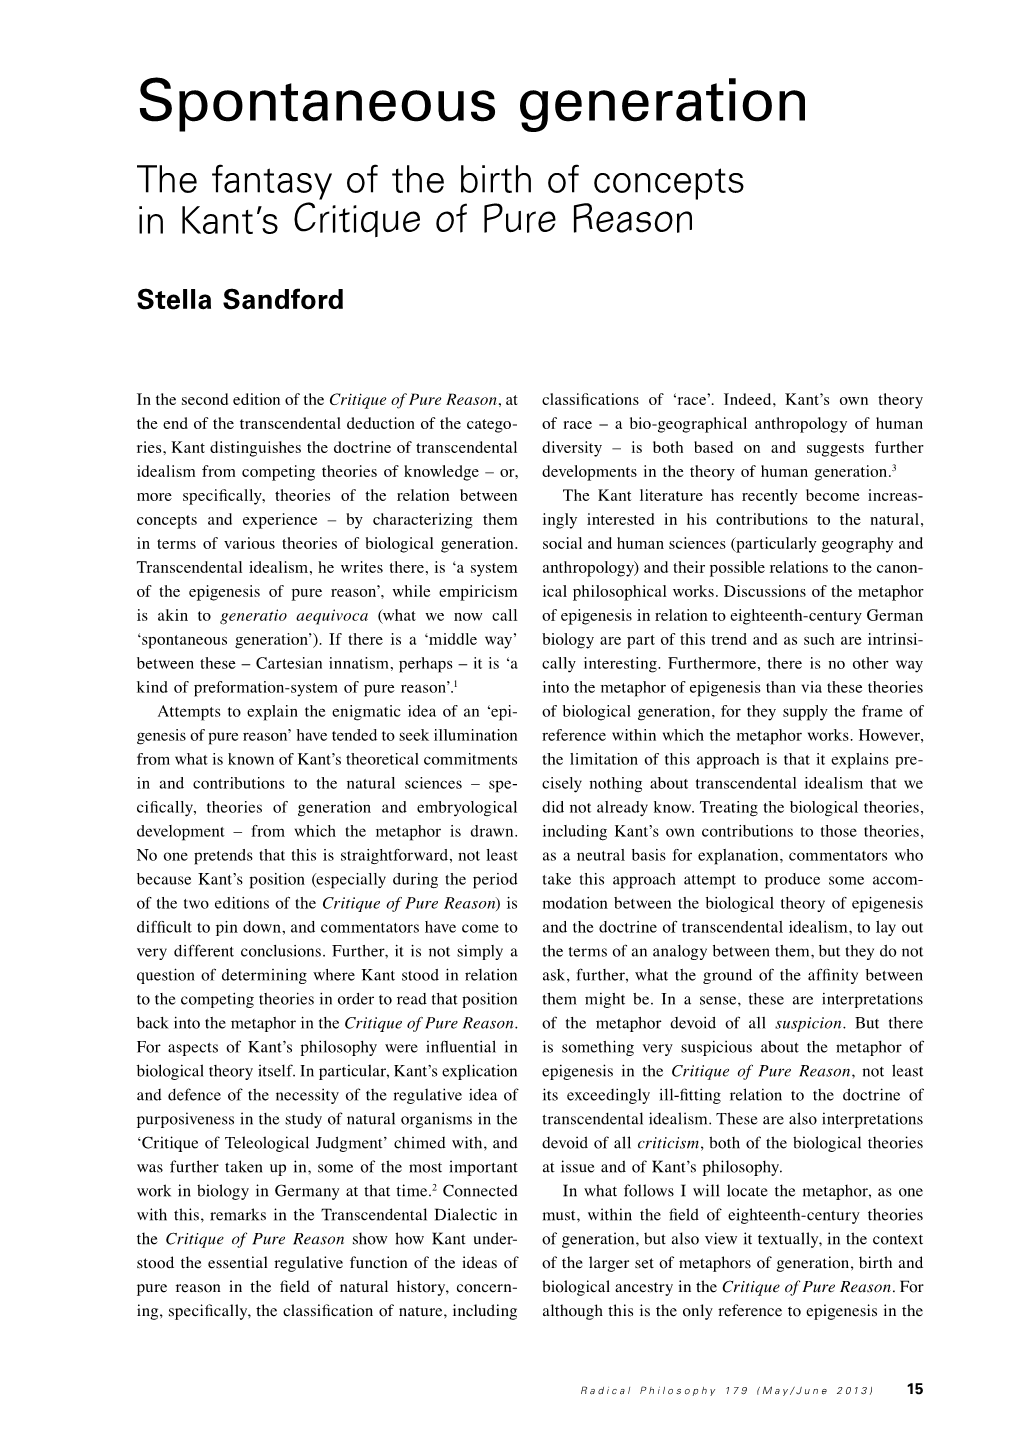 Spontaneous Generation the Fantasy of the Birth of Concepts in Kant’S Critique of Pure Reason